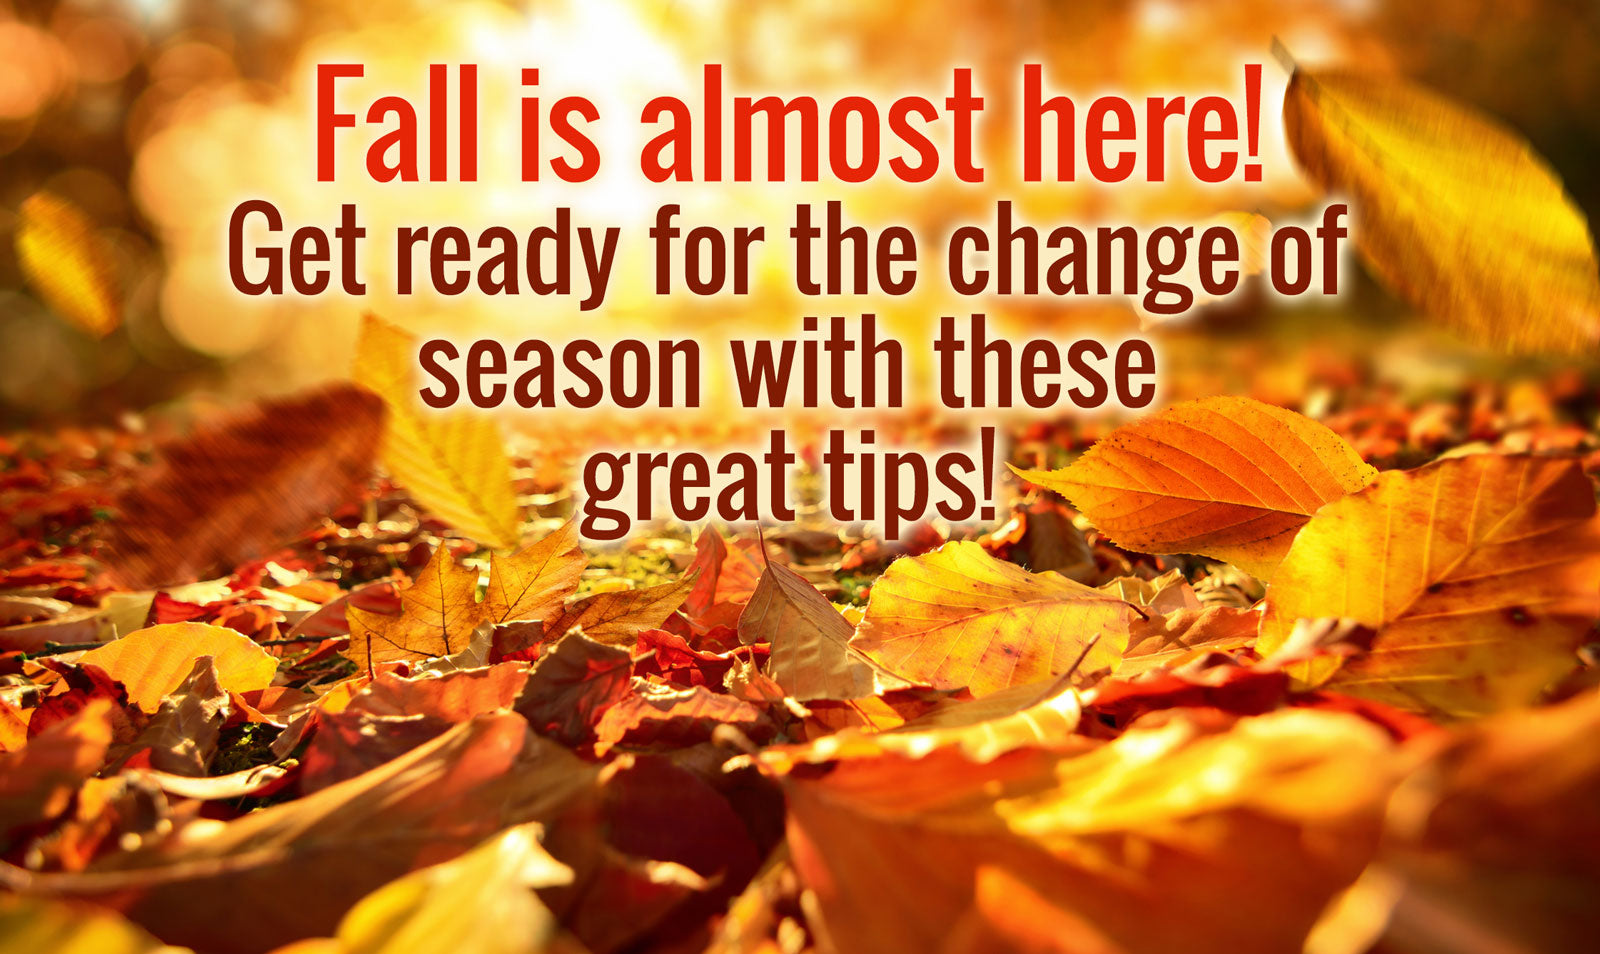 Ten Ways to Prepare Your Home for Fall